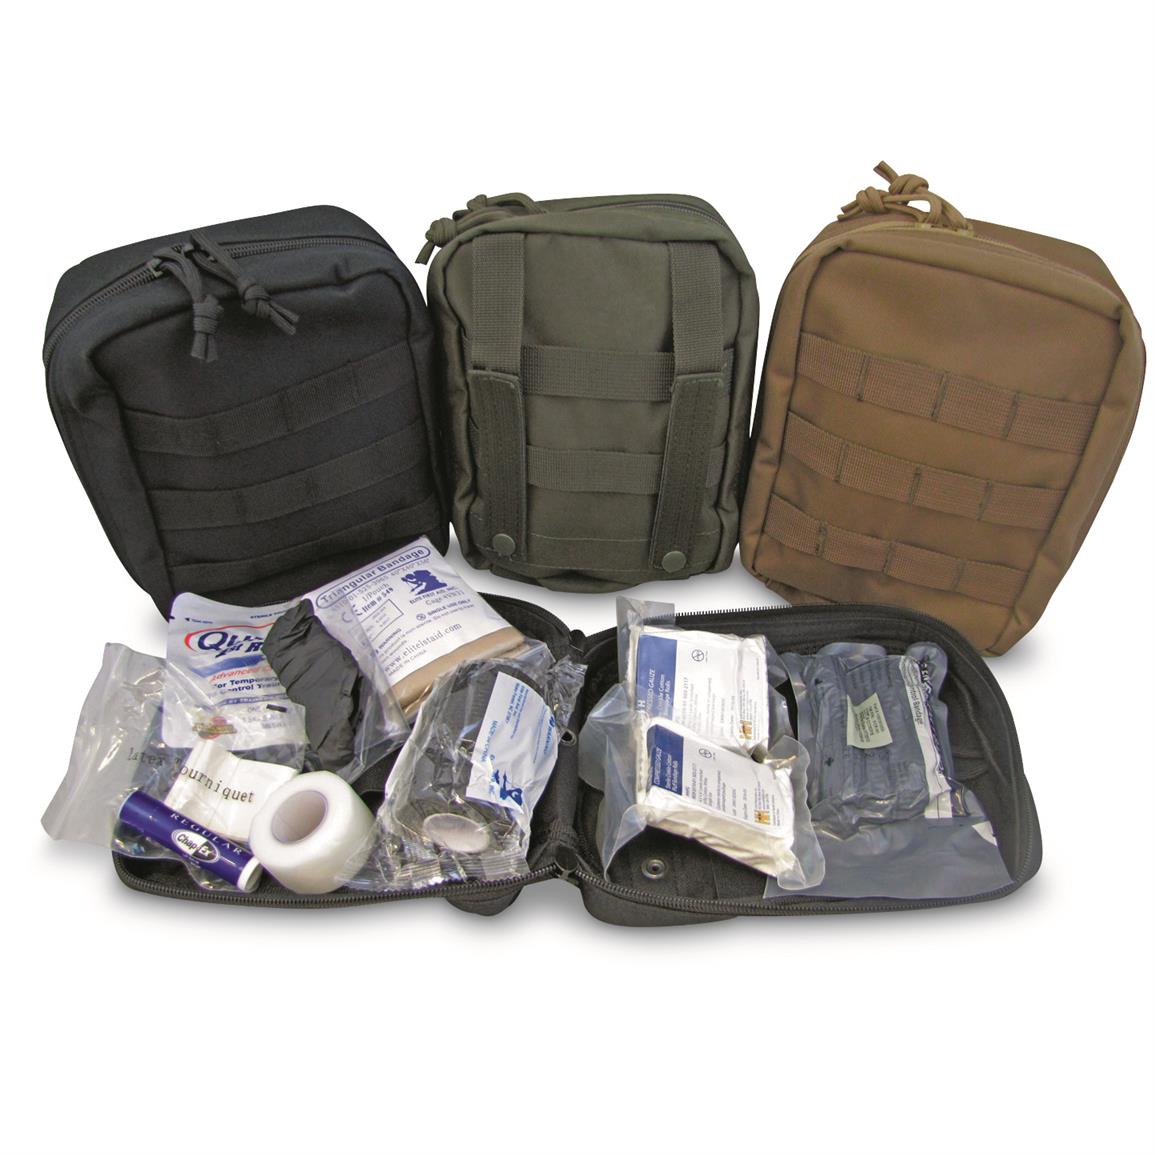 Kombat Tactical Black Military Emergency Field FIRST AID KIT Filled Pouch SMALL 